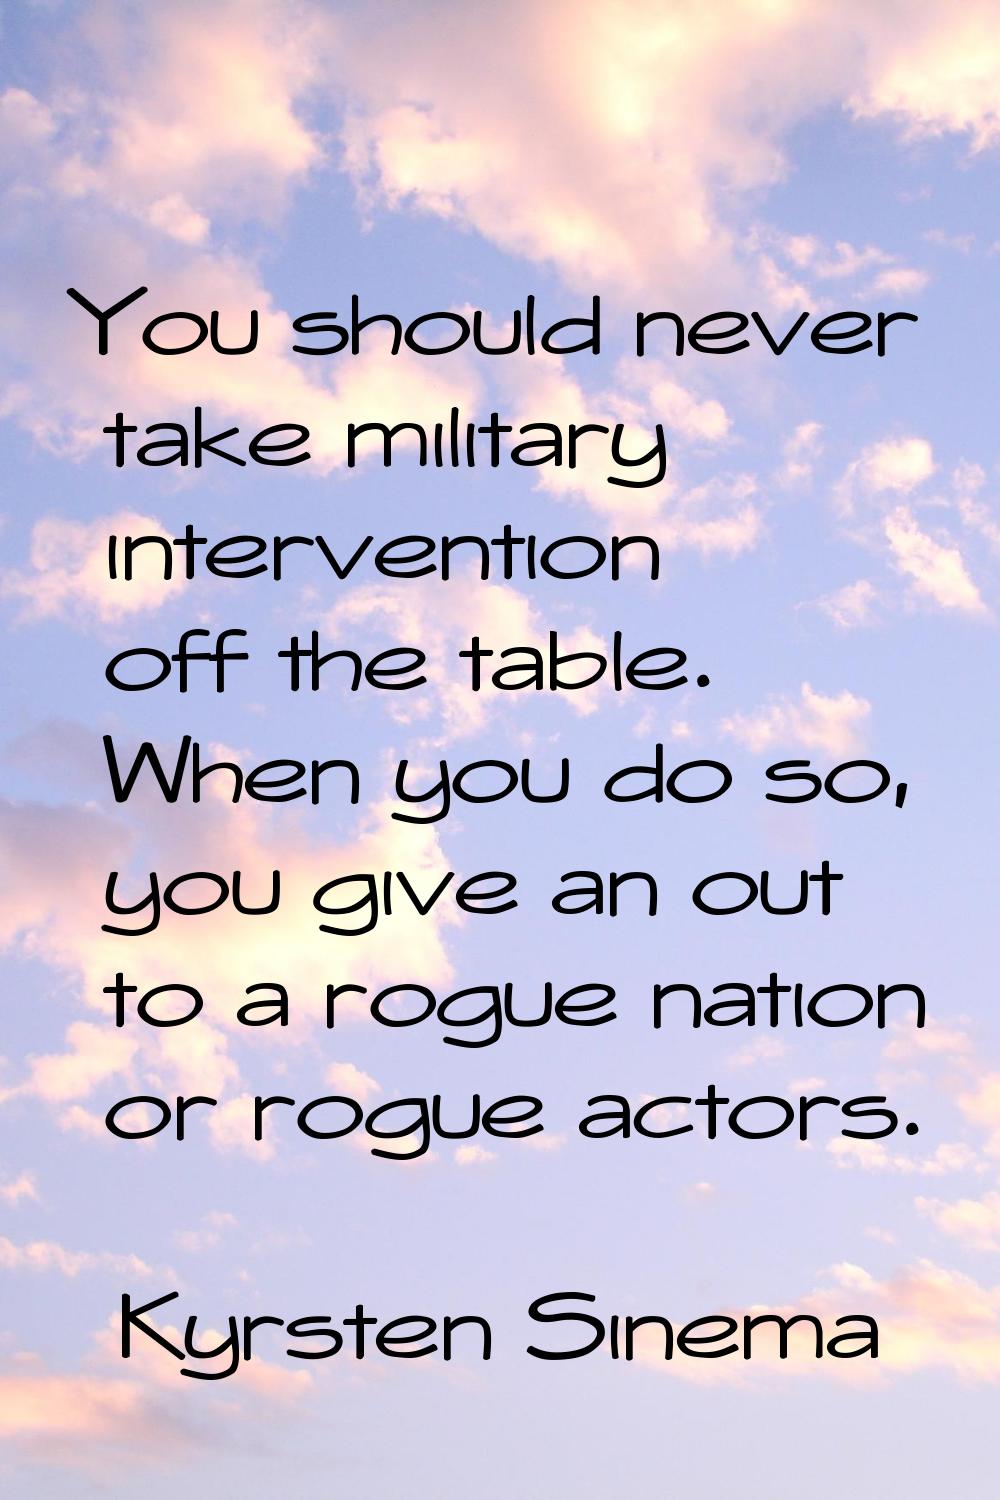 You should never take military intervention off the table. When you do so, you give an out to a rog